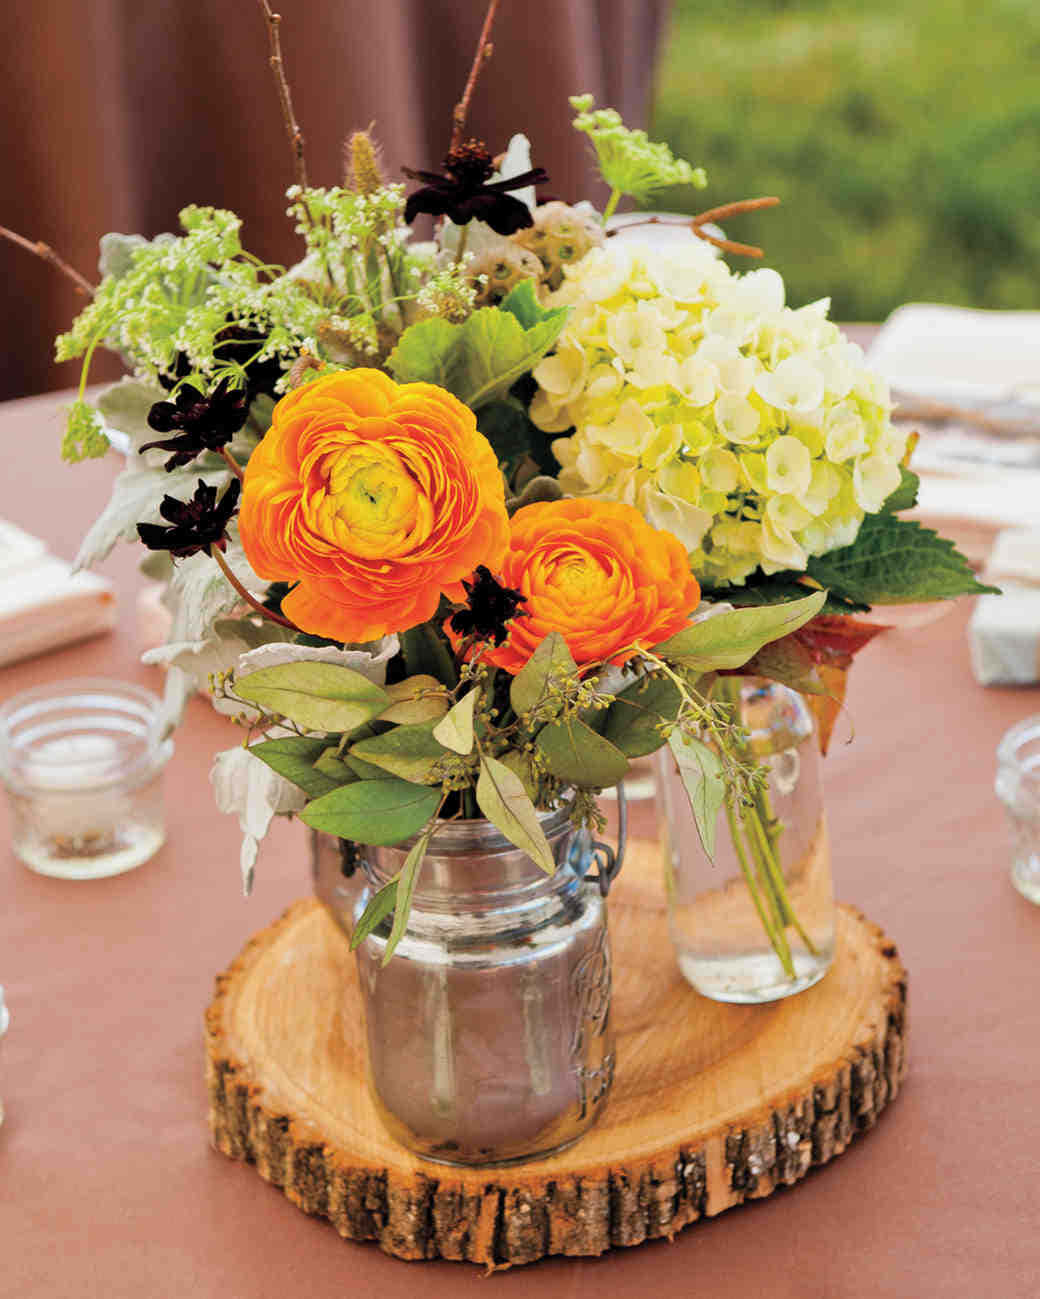 A Fresh, Colorful Centerpiece Adds Beauty To Any Room Wallpaper